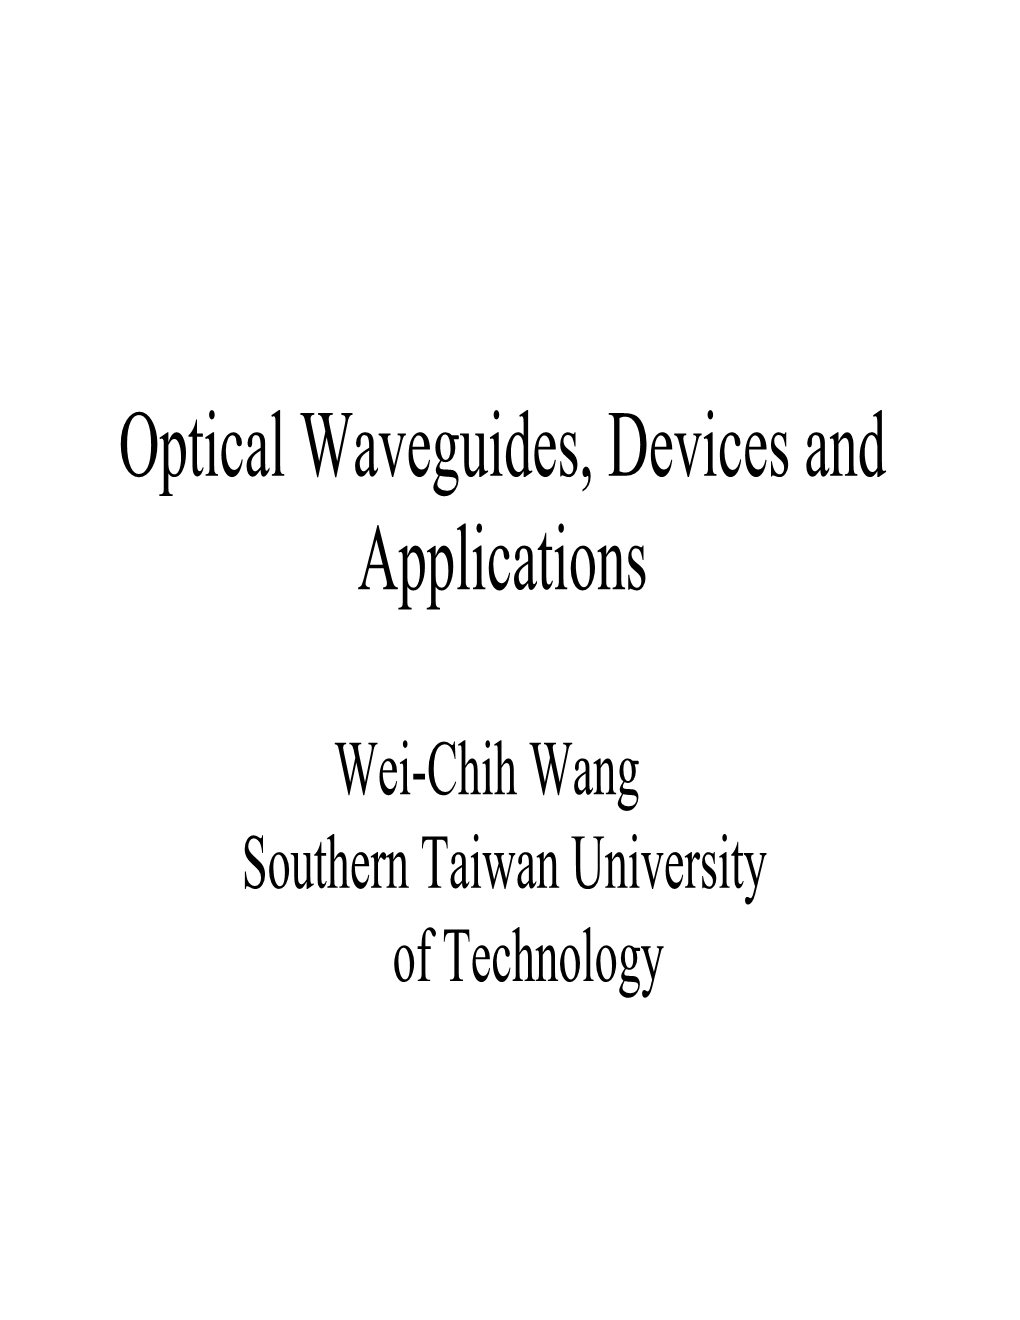 Optical Waveguides, Devices and Applications